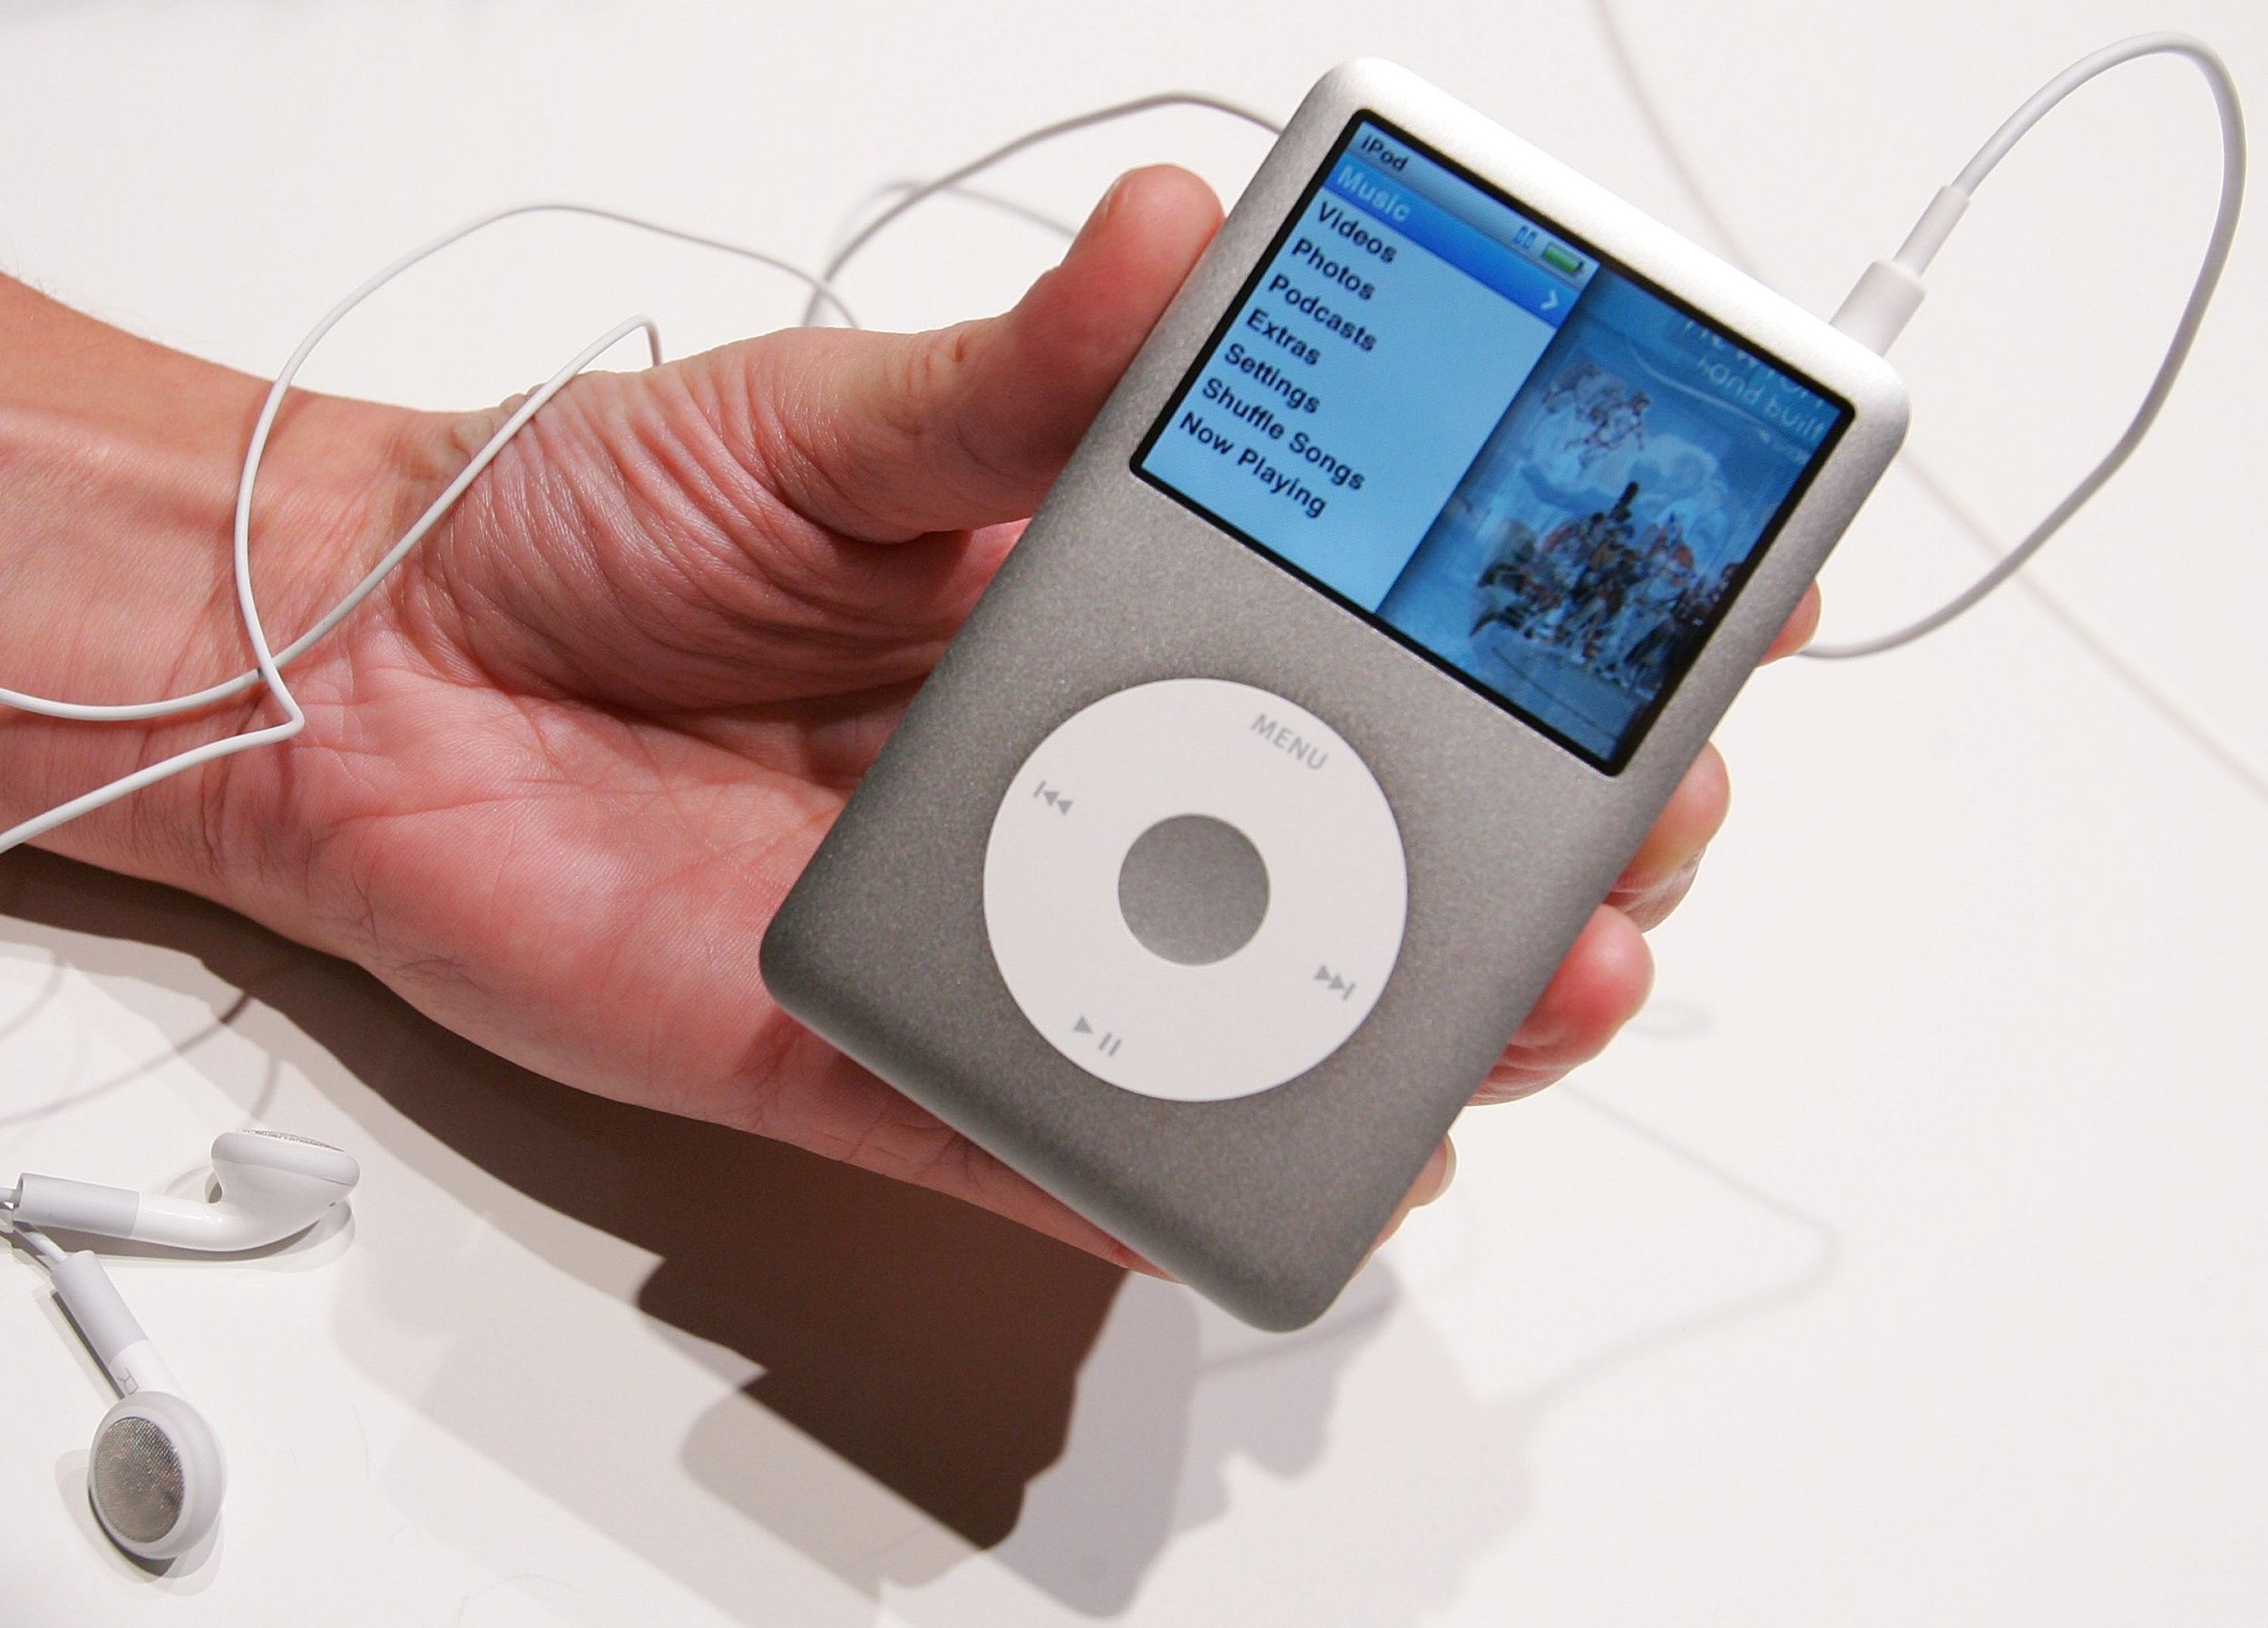 Your iPod Classic Can Still Compete With the iPhone Music App